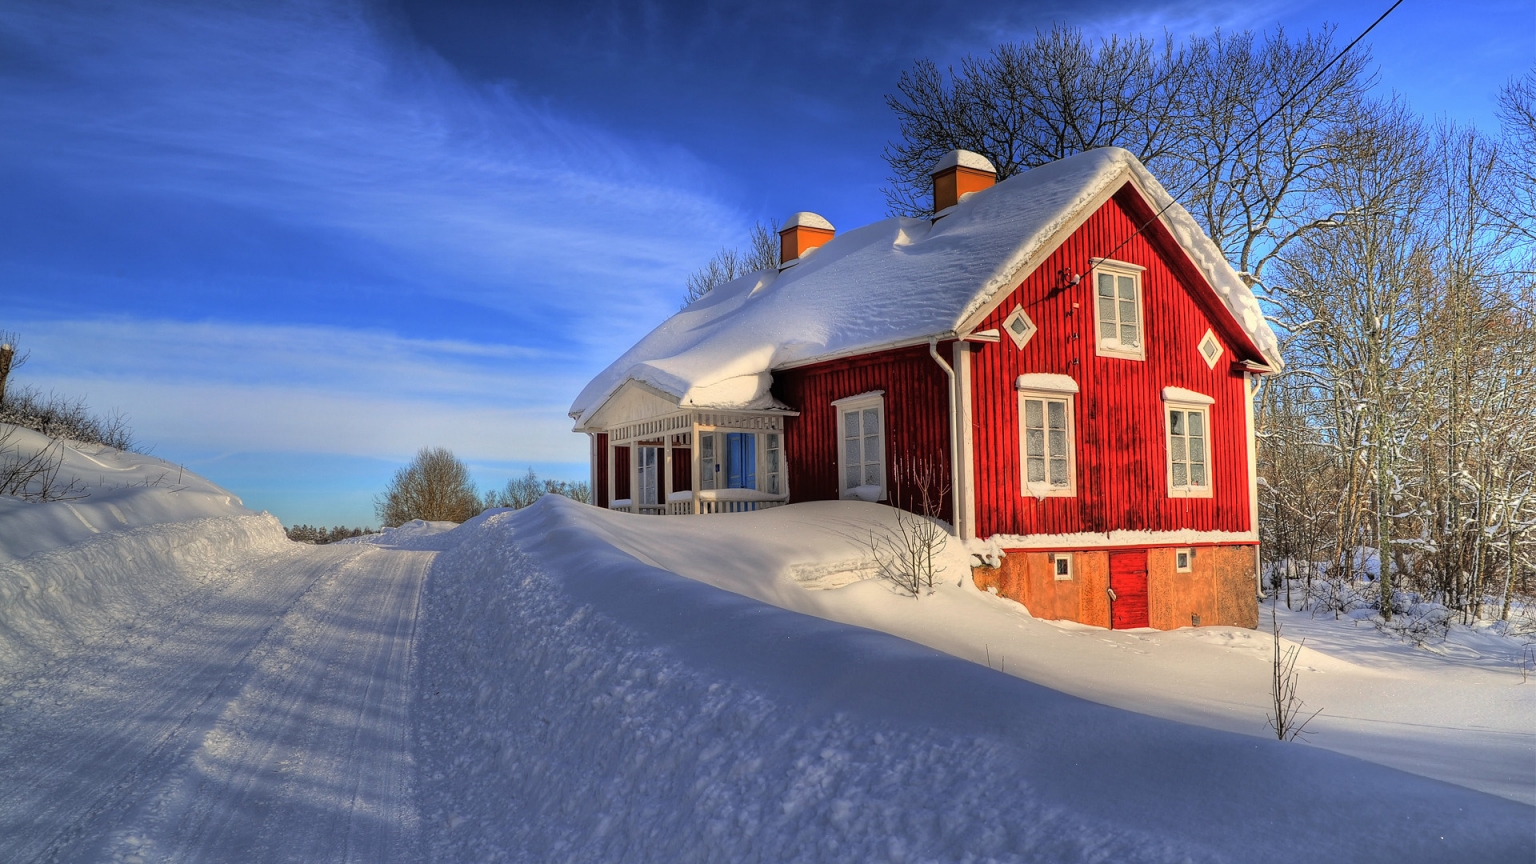 House Between Snow for 1536 x 864 HDTV resolution